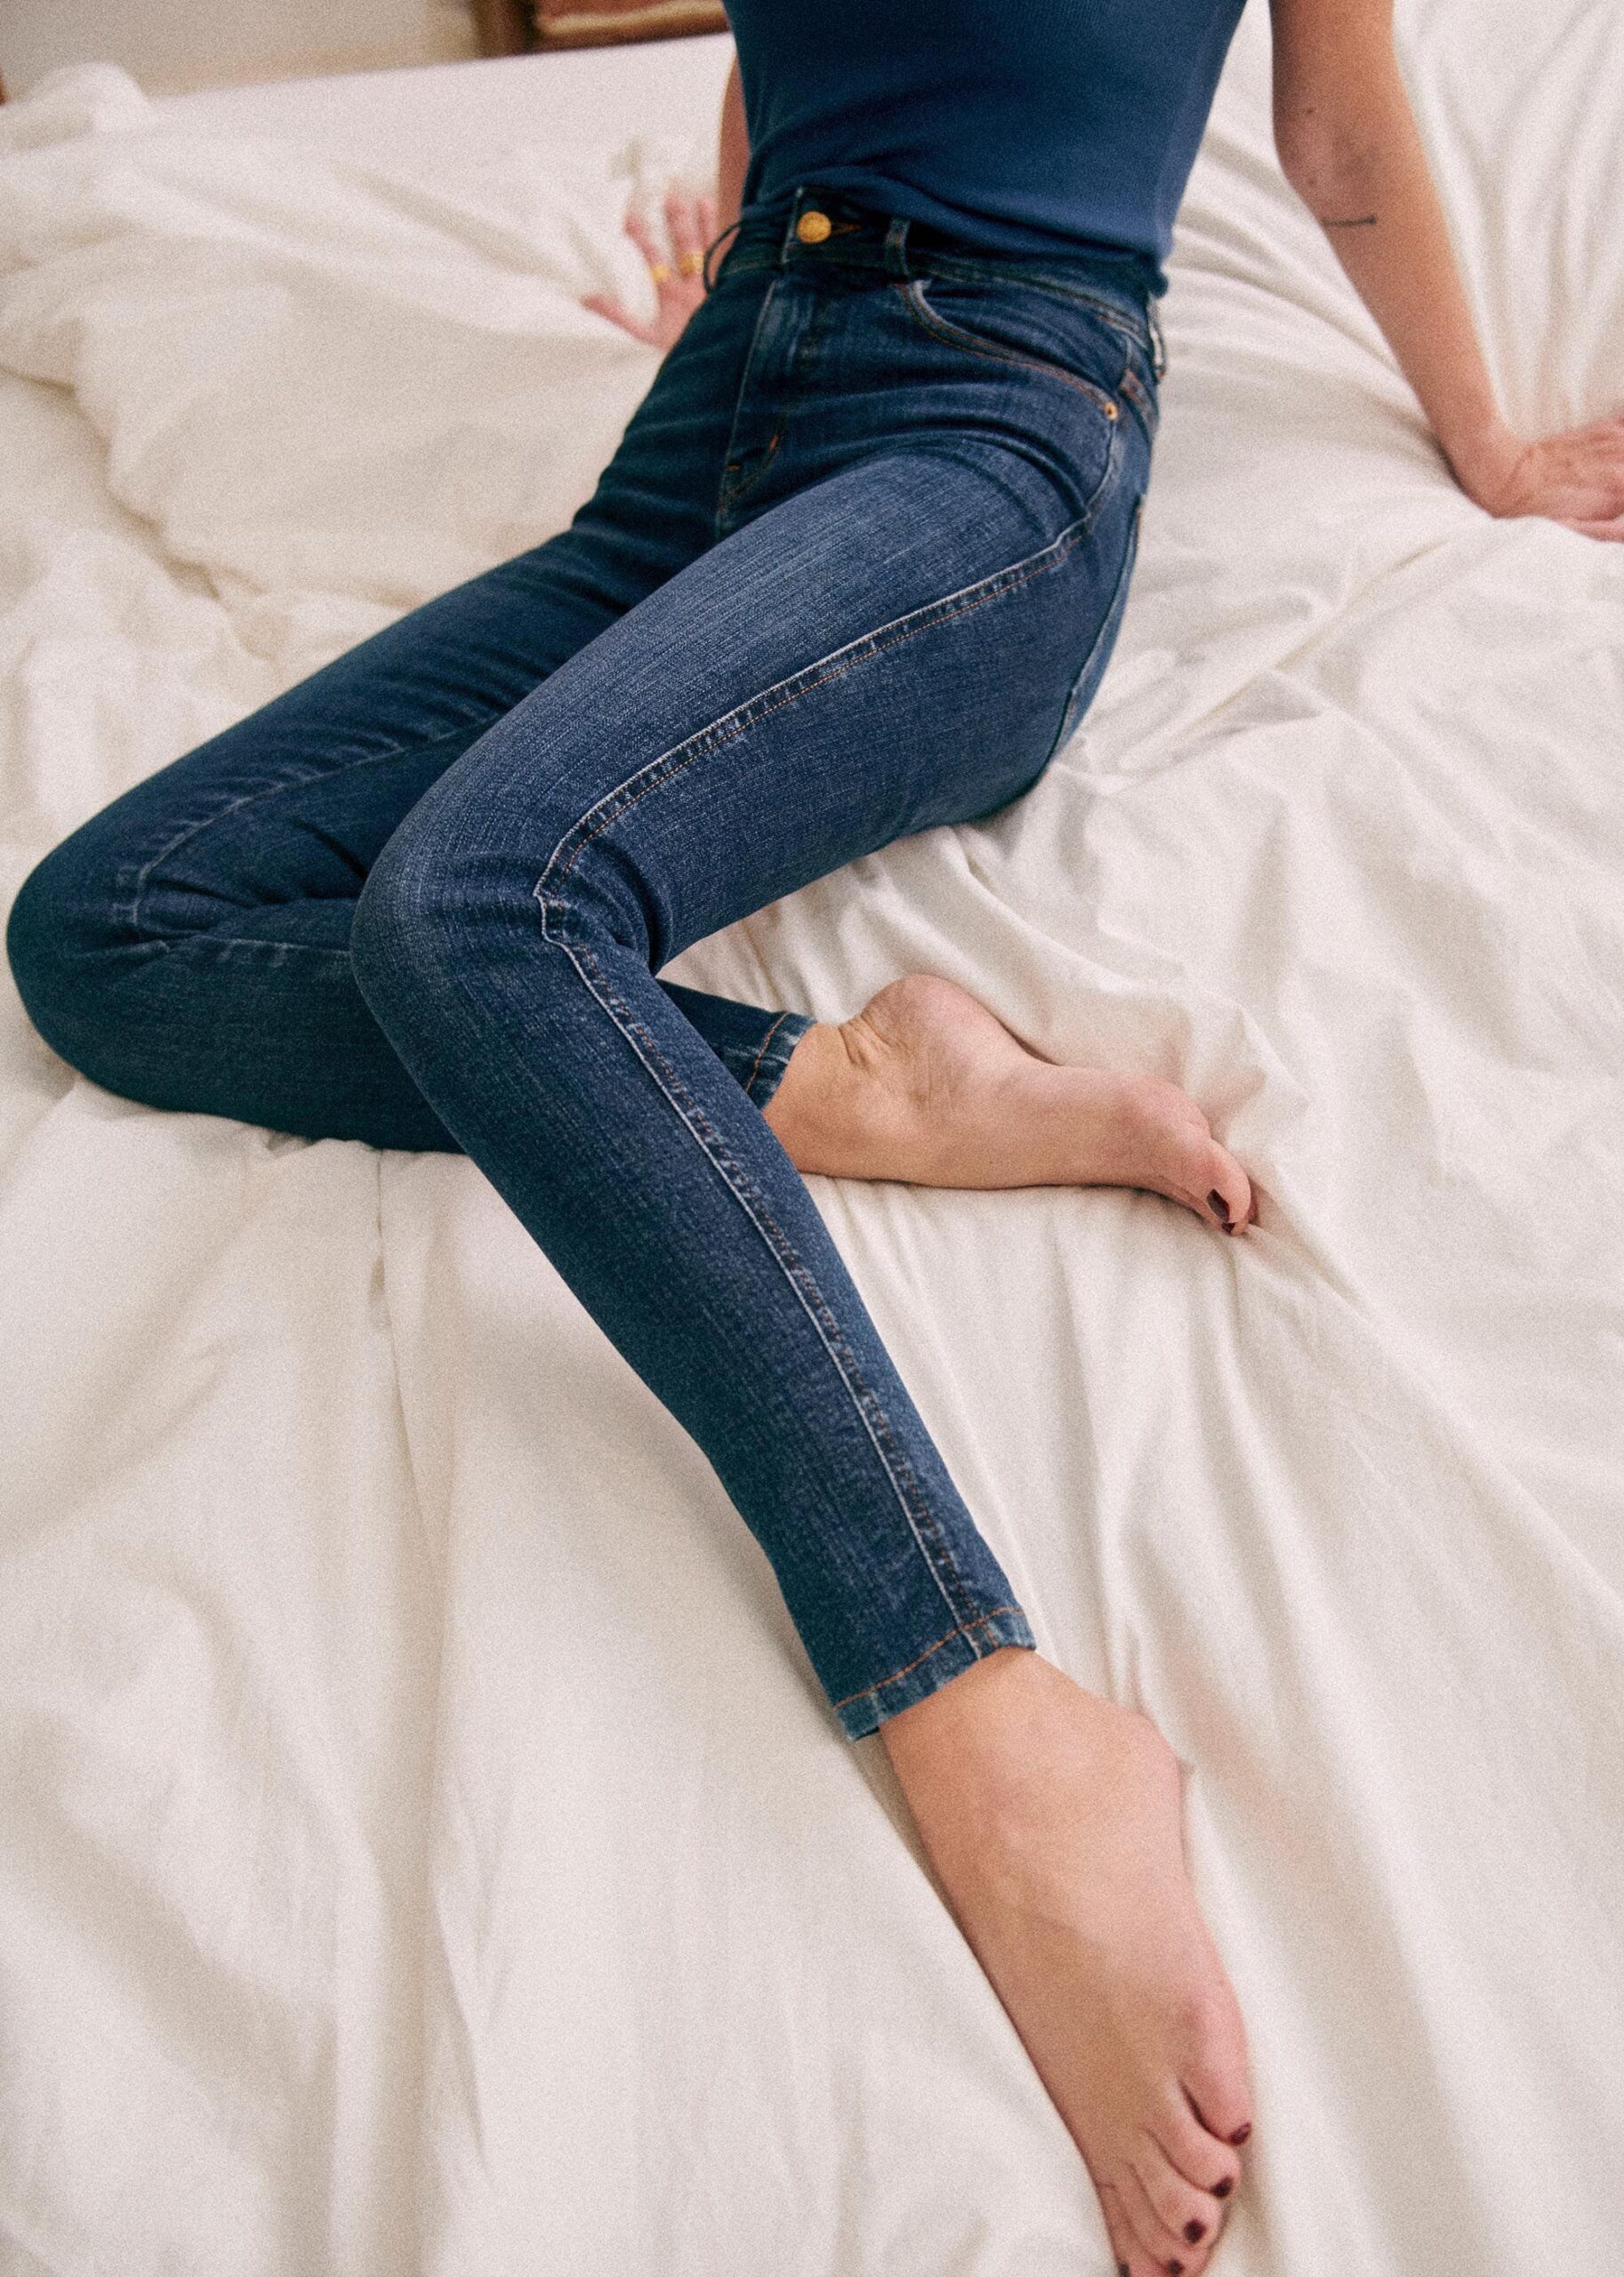 How slim fit jeans can give you the best
look